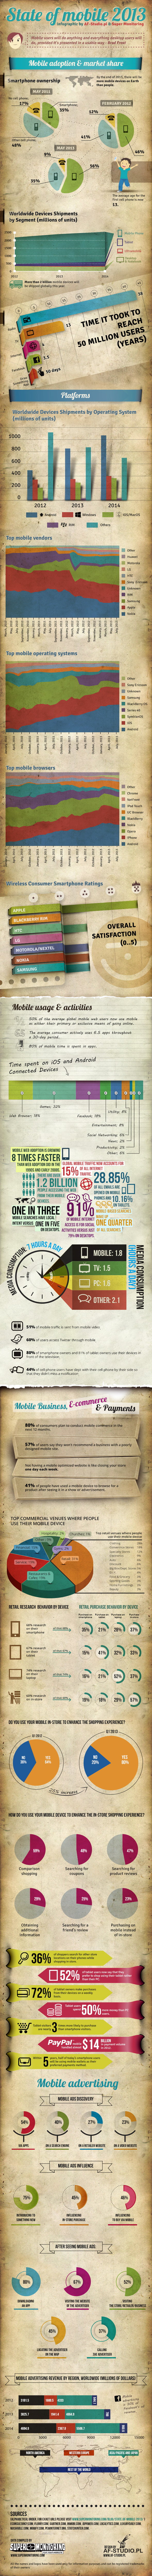 mobile stats 2013